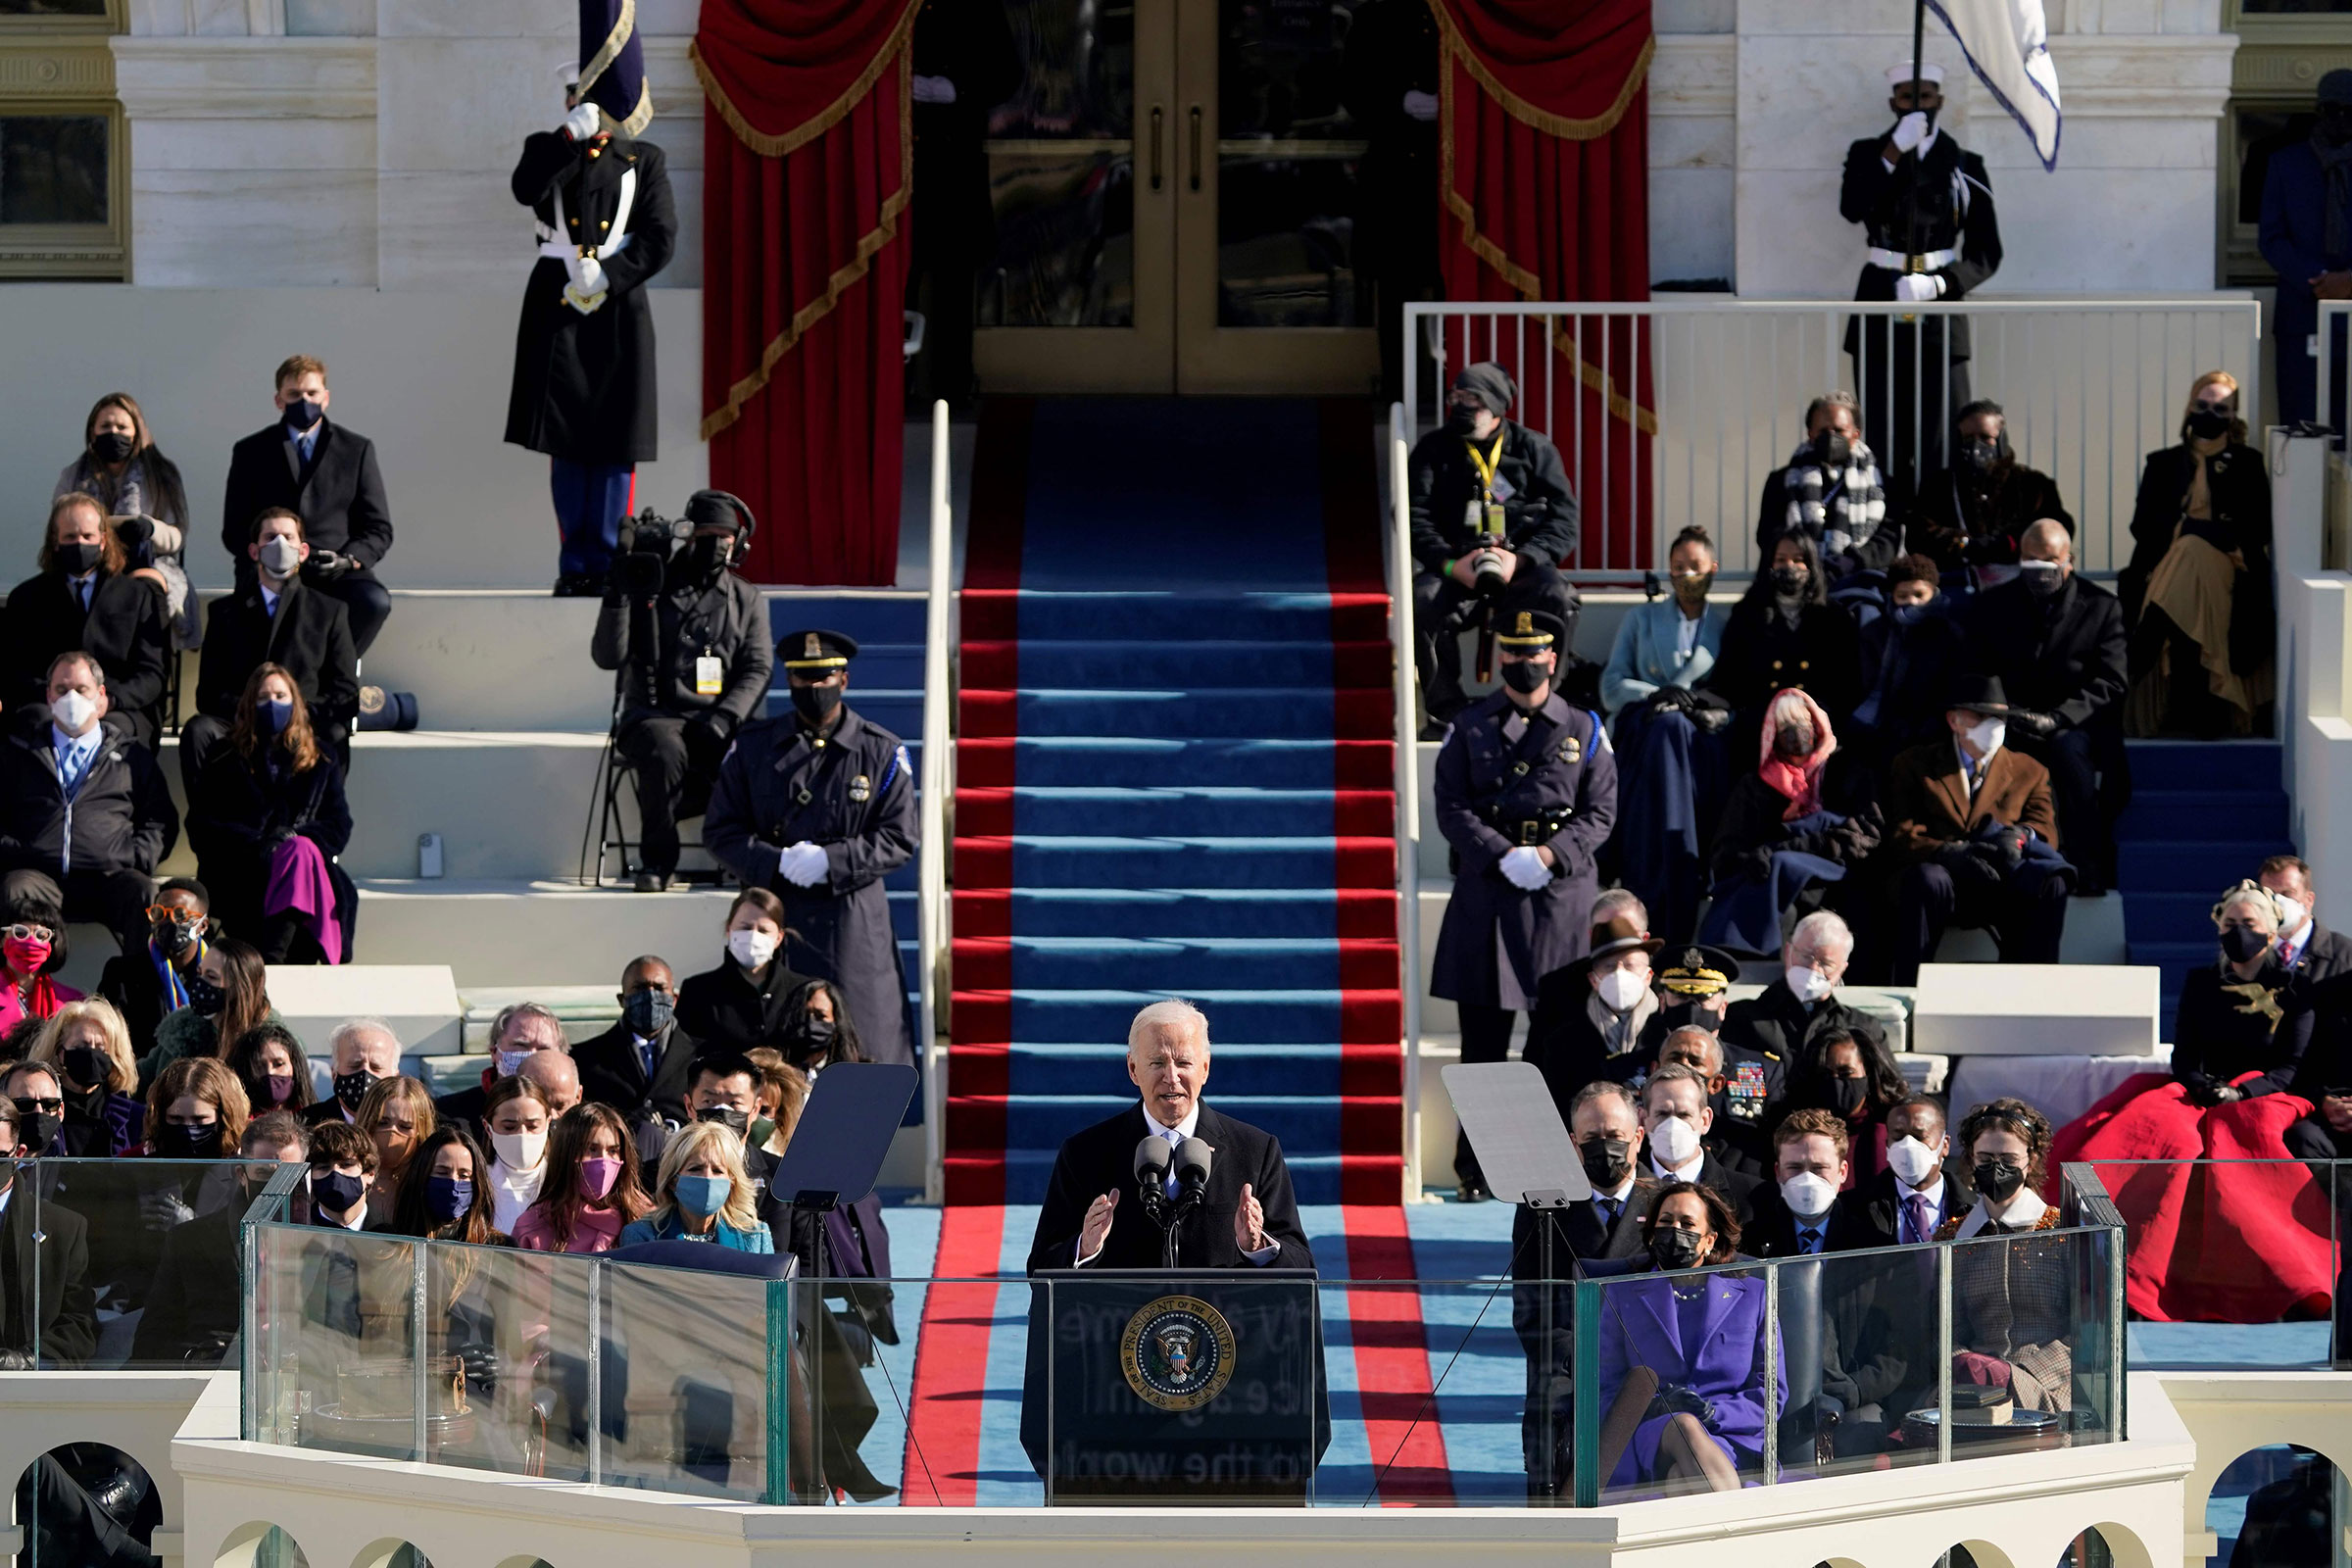 President Joe Biden delivers his inauguration speech after being sworn in as the 46th President of the United States in Washington on Jan. 20, 2021.